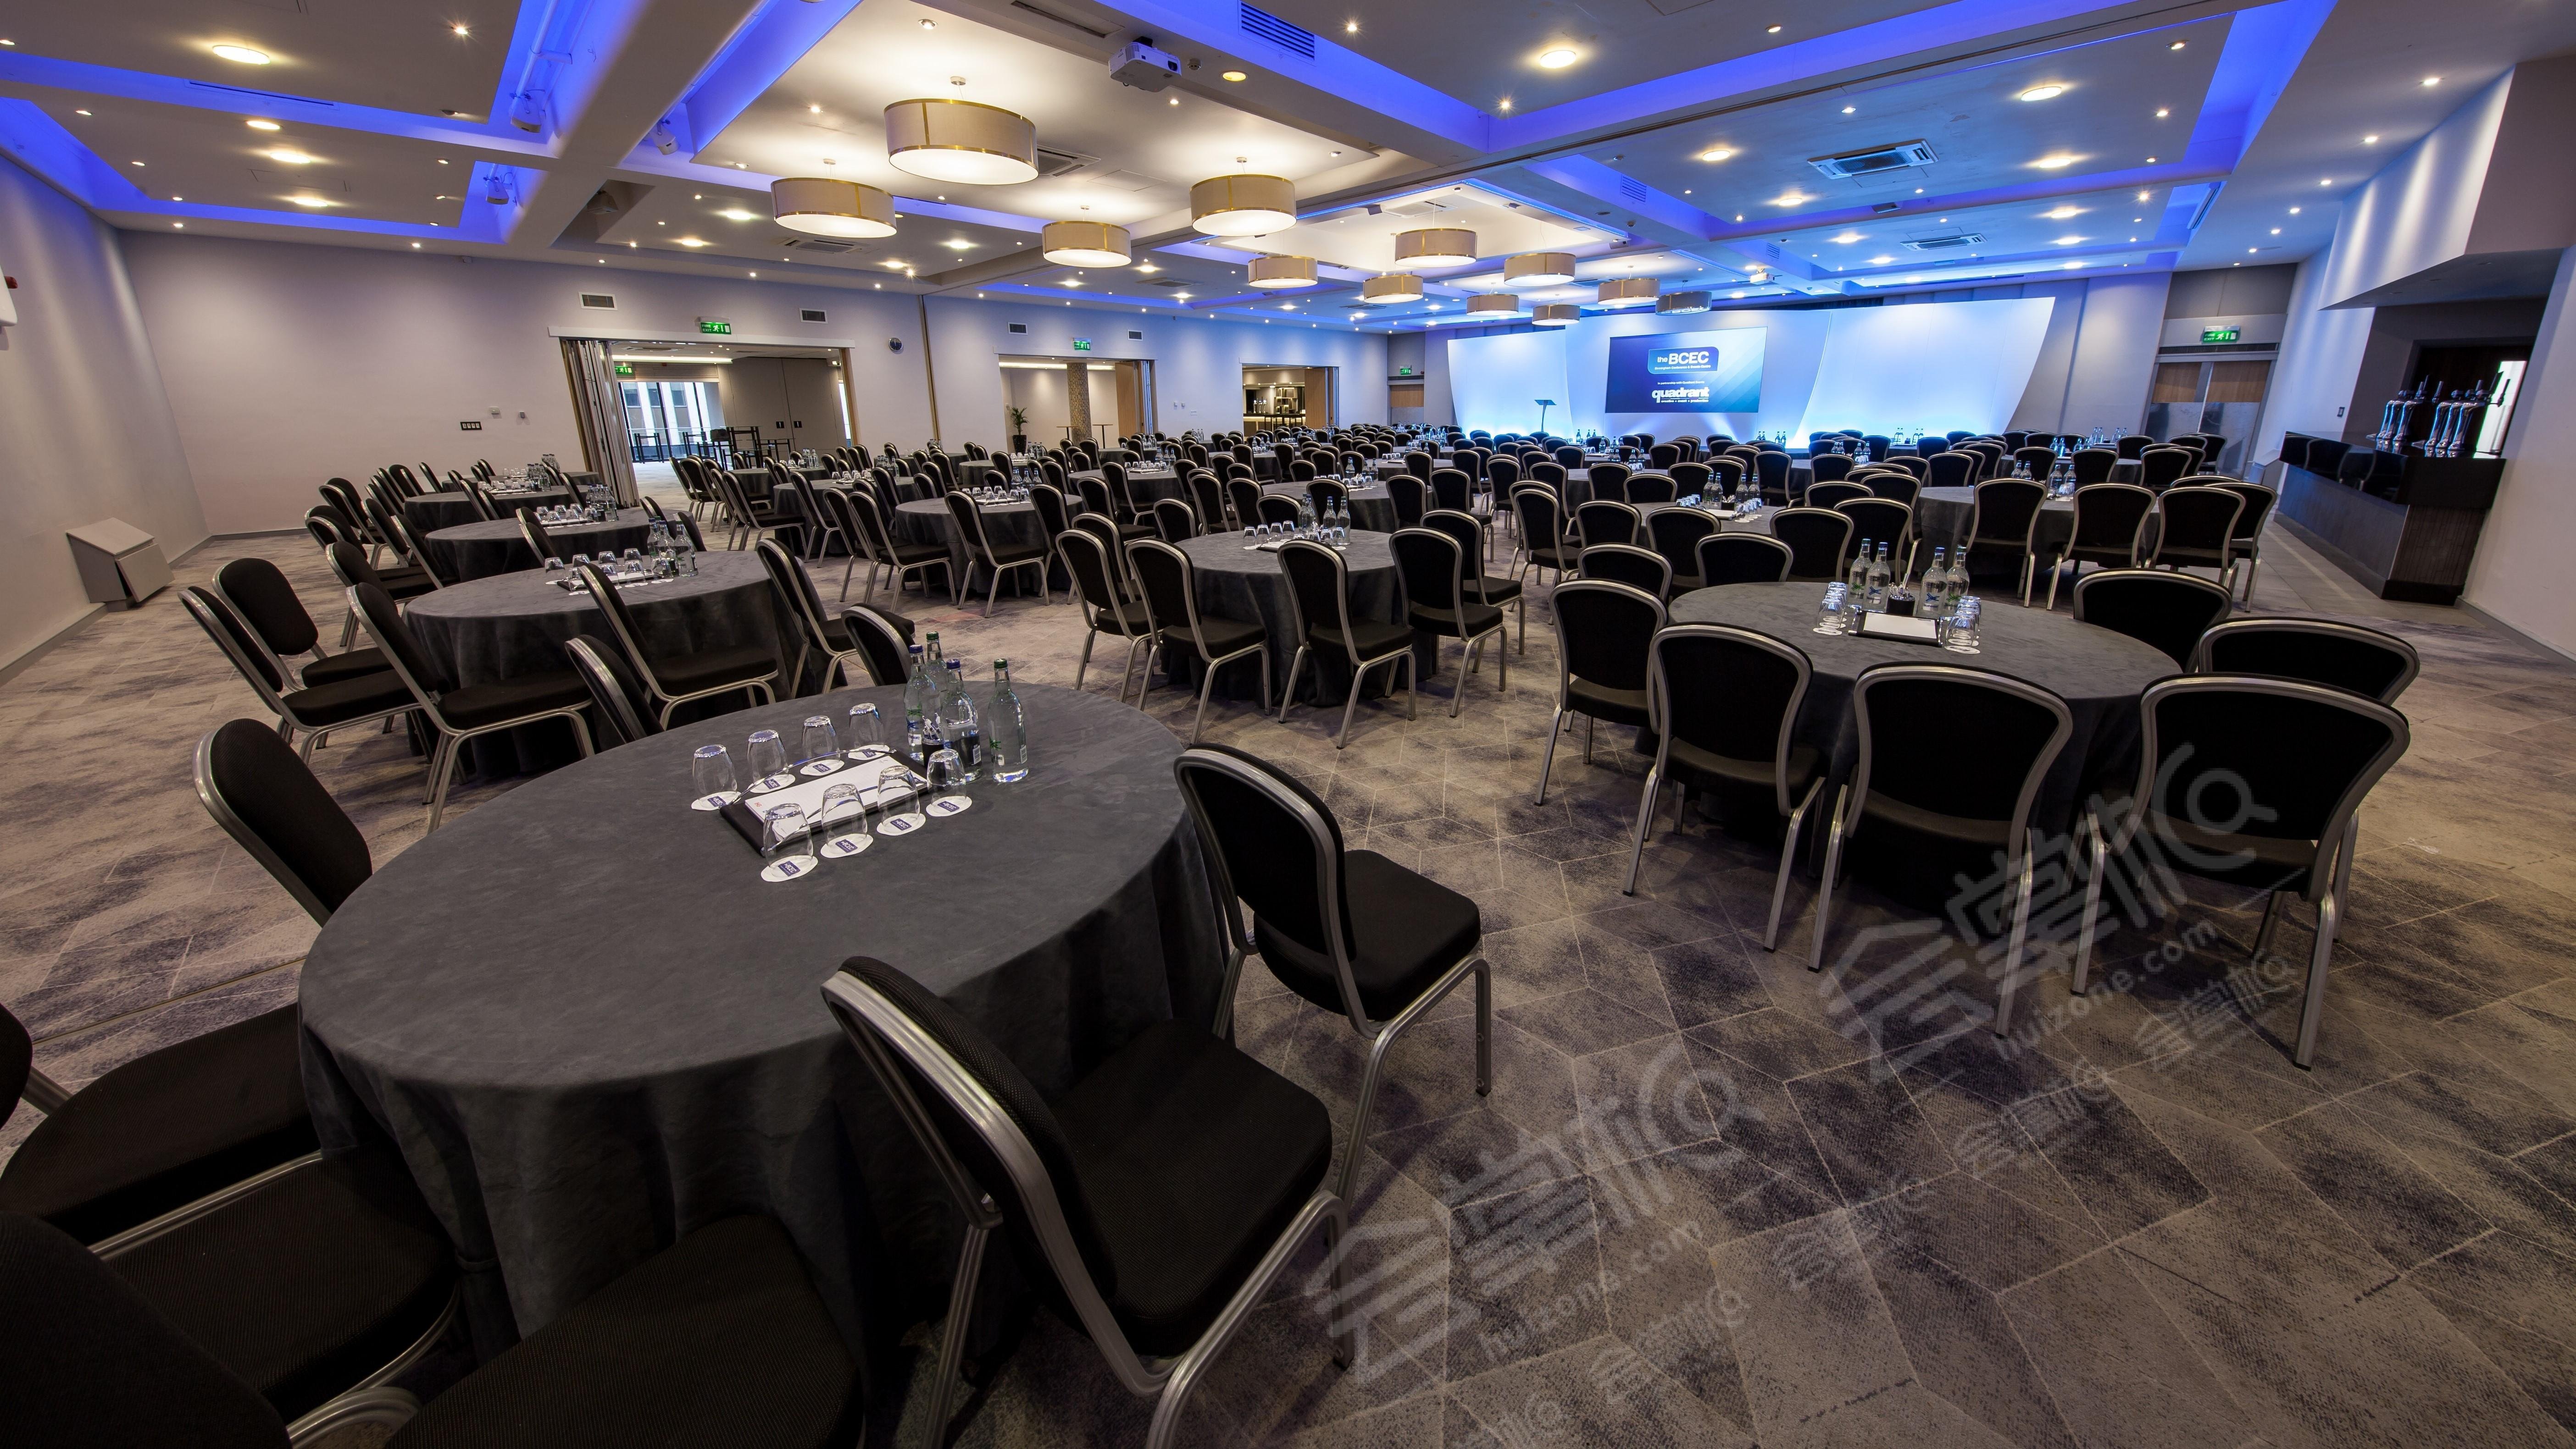 The Birmingham Conference and Events Centre at the Holiday Inn Birmingham City Centre2